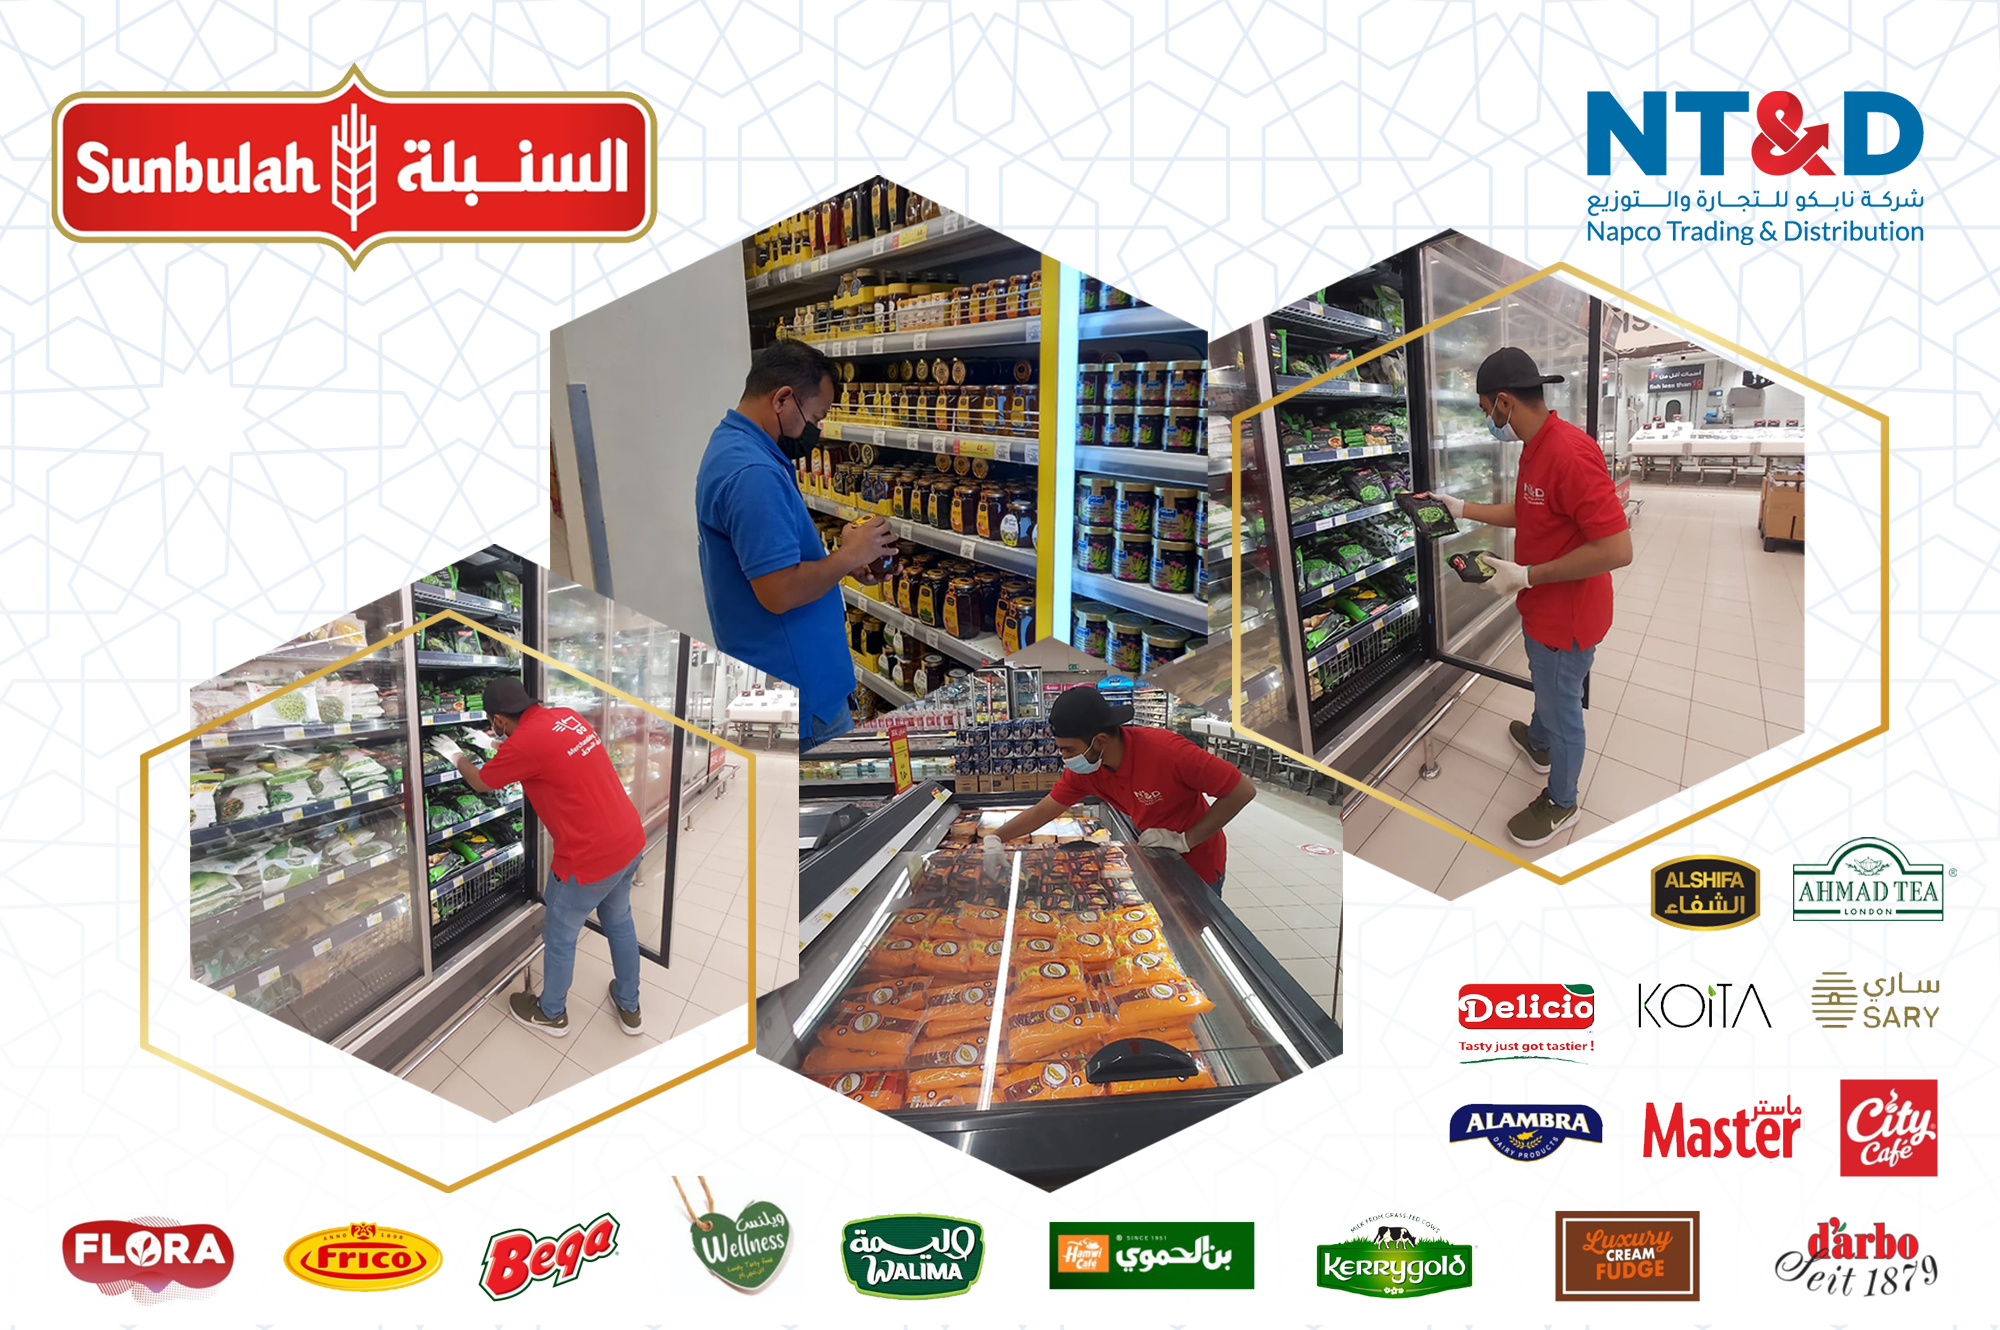 Napco Trading & Distribution Announces its Partnership with Sunbulah Group, one of the Pioneers in the Food Manufacturing Industry in the Kingdom of Saudi Arabia and the Middle East